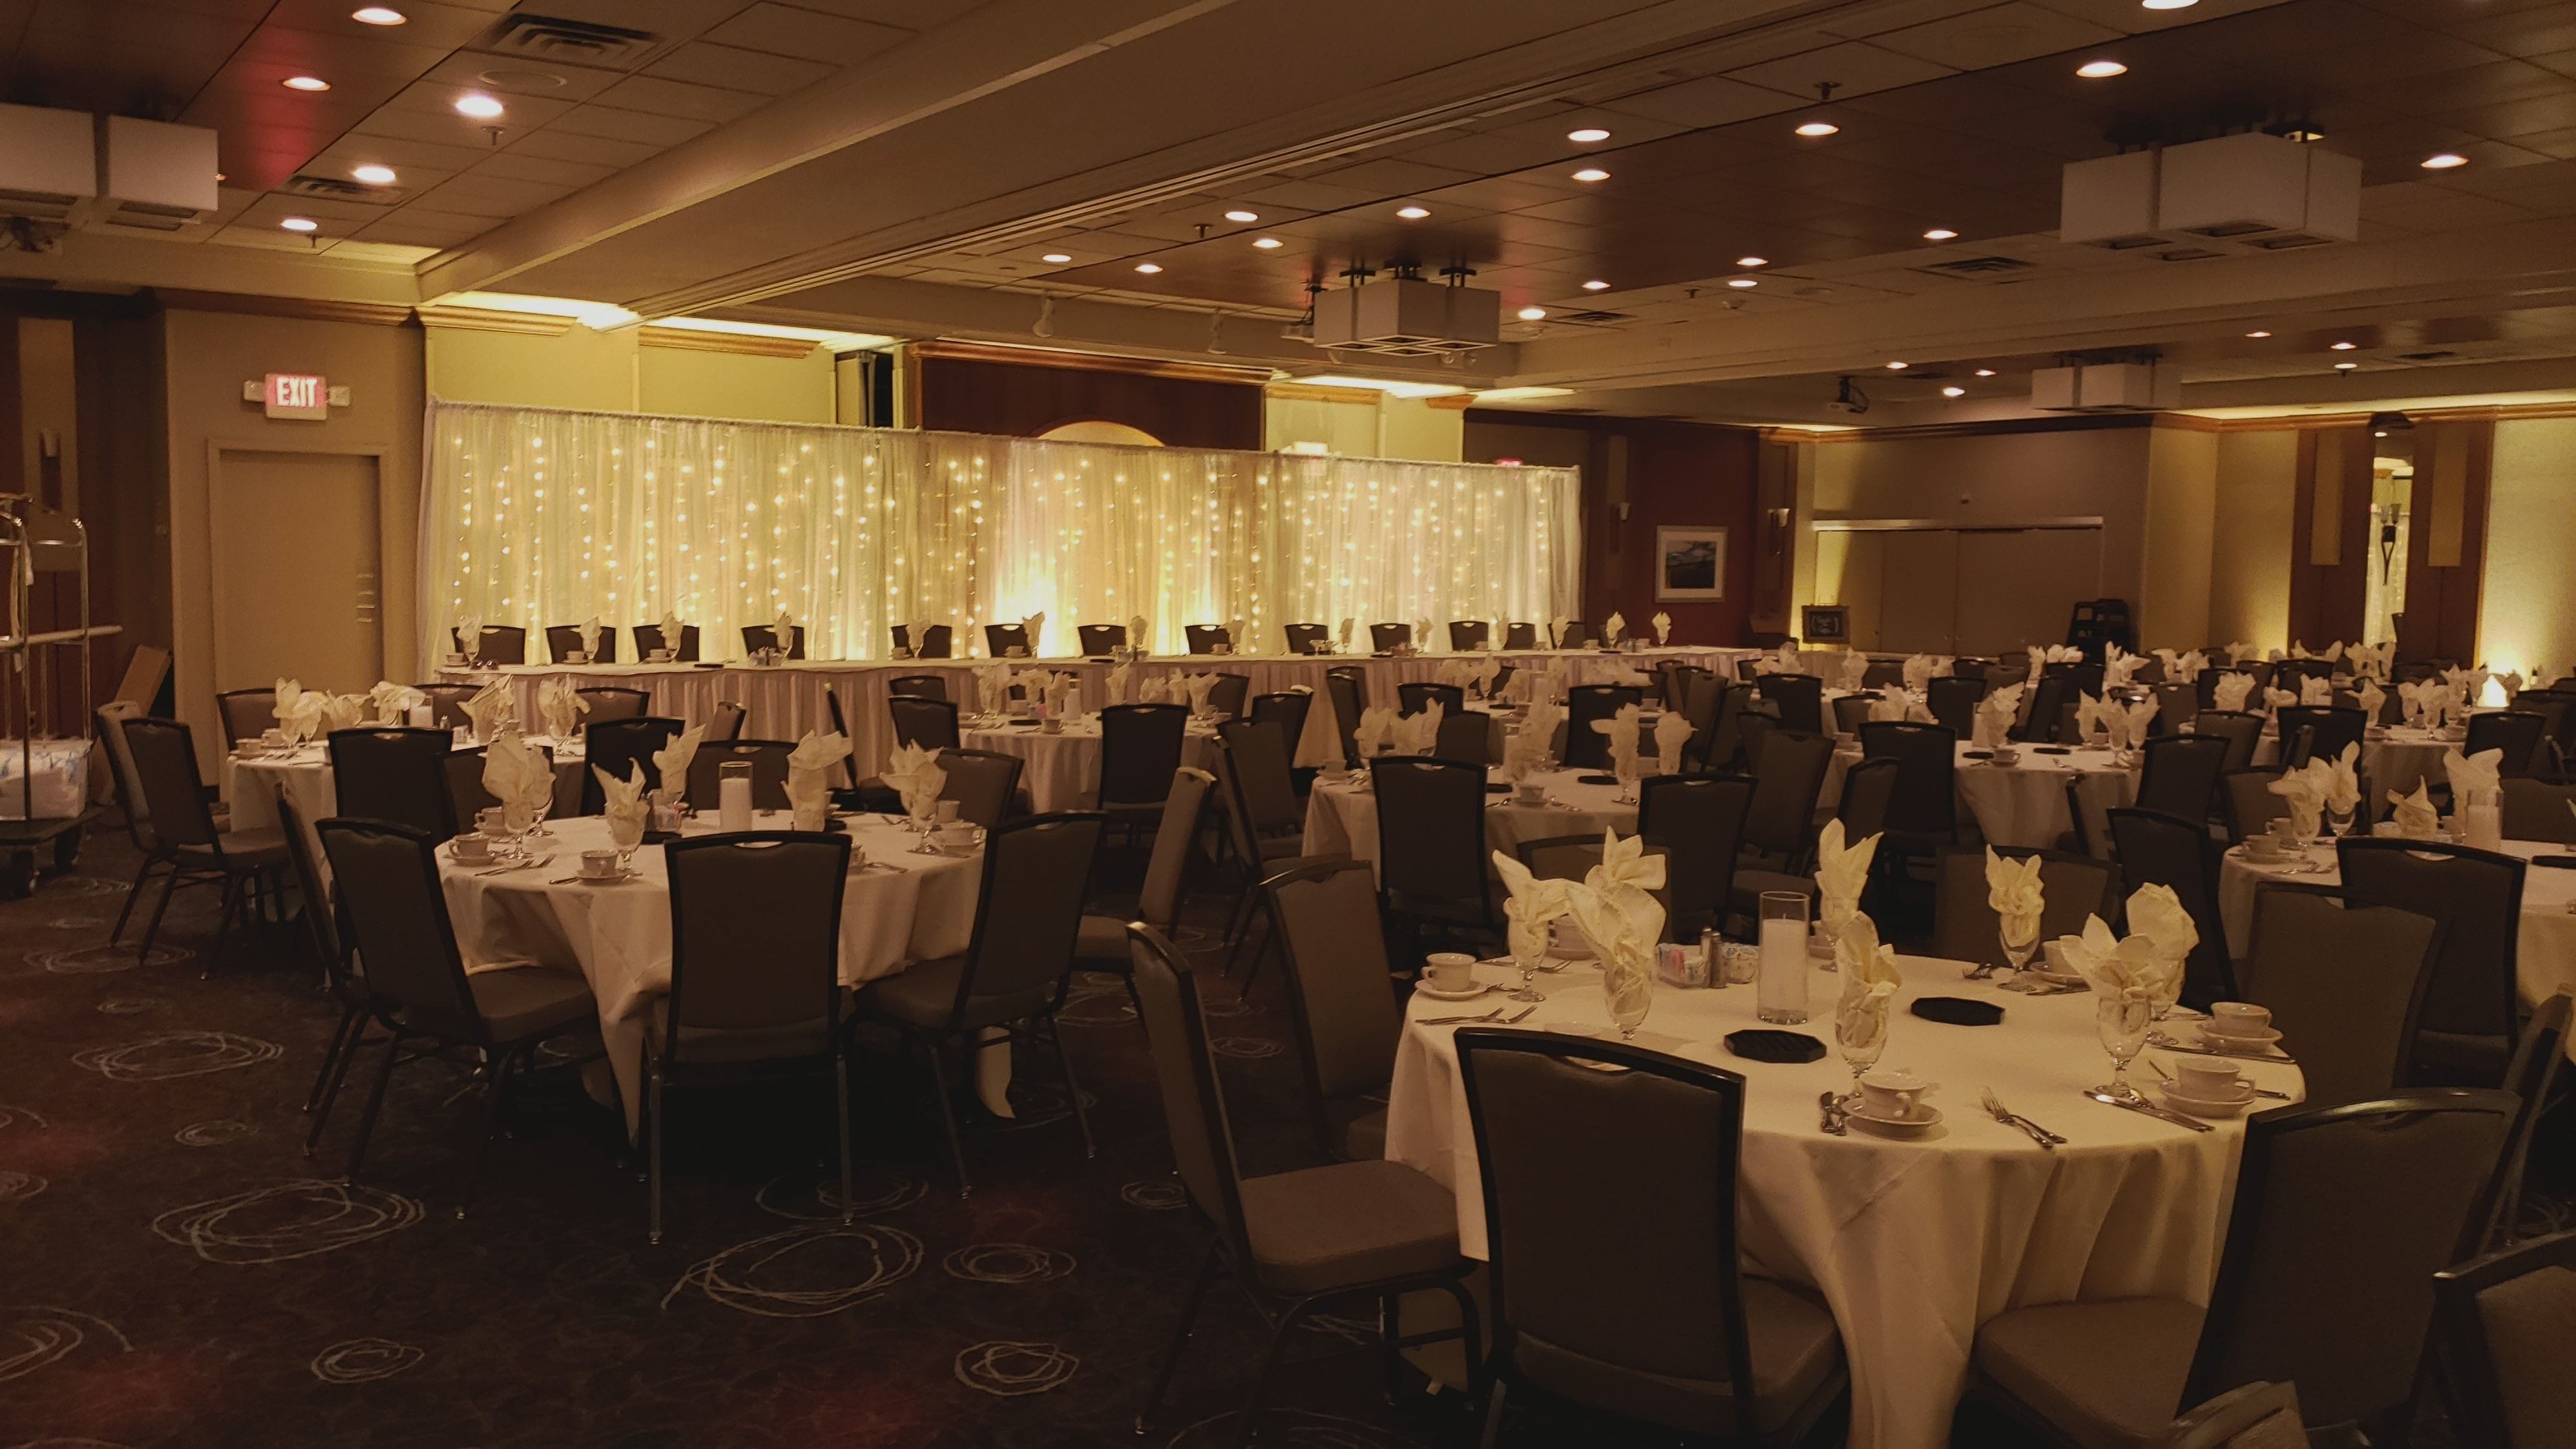 Holiday Inn, Duluth
Great Lakes Ballroom with champagne color wedding lighting. Backdrop by @thevaultduluth